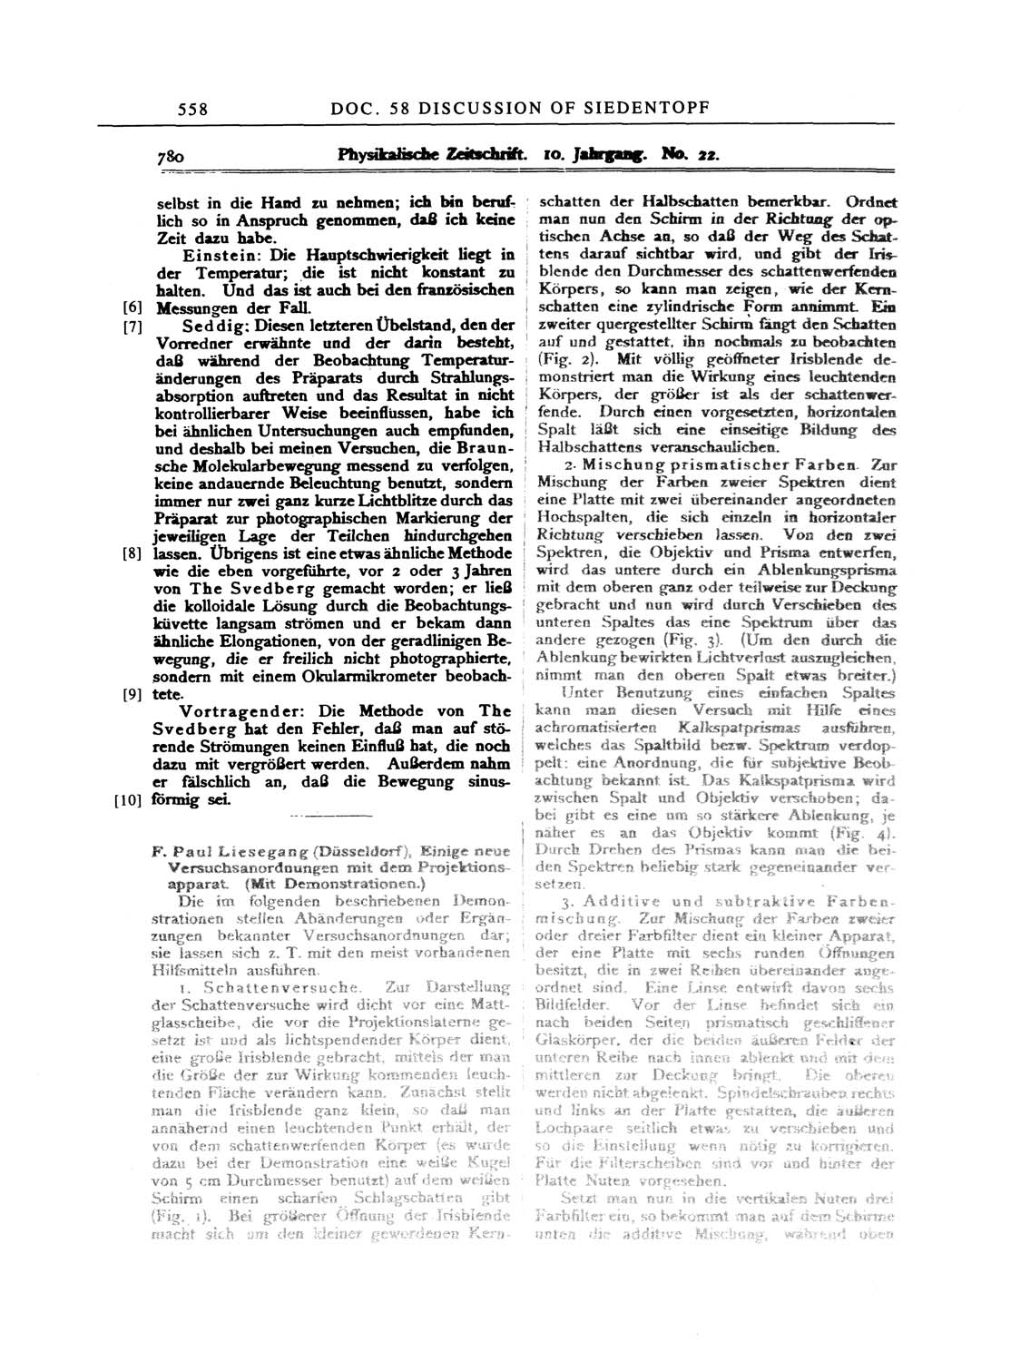 Volume 2: The Swiss Years: Writings, 1900-1909 page 558